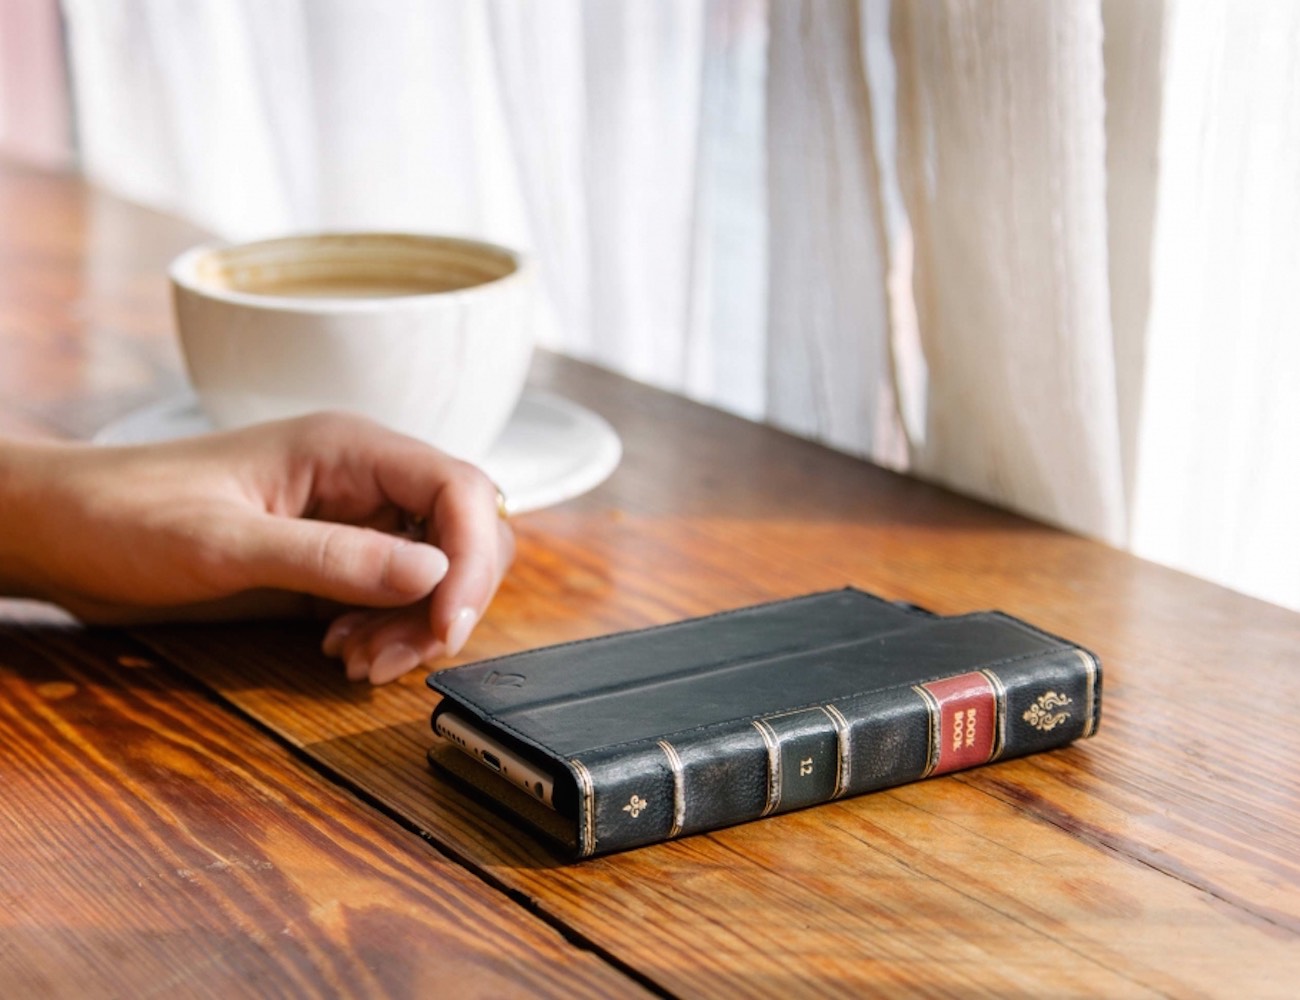 BookBook Case and Wallet for iPhone 6 by Twelve South